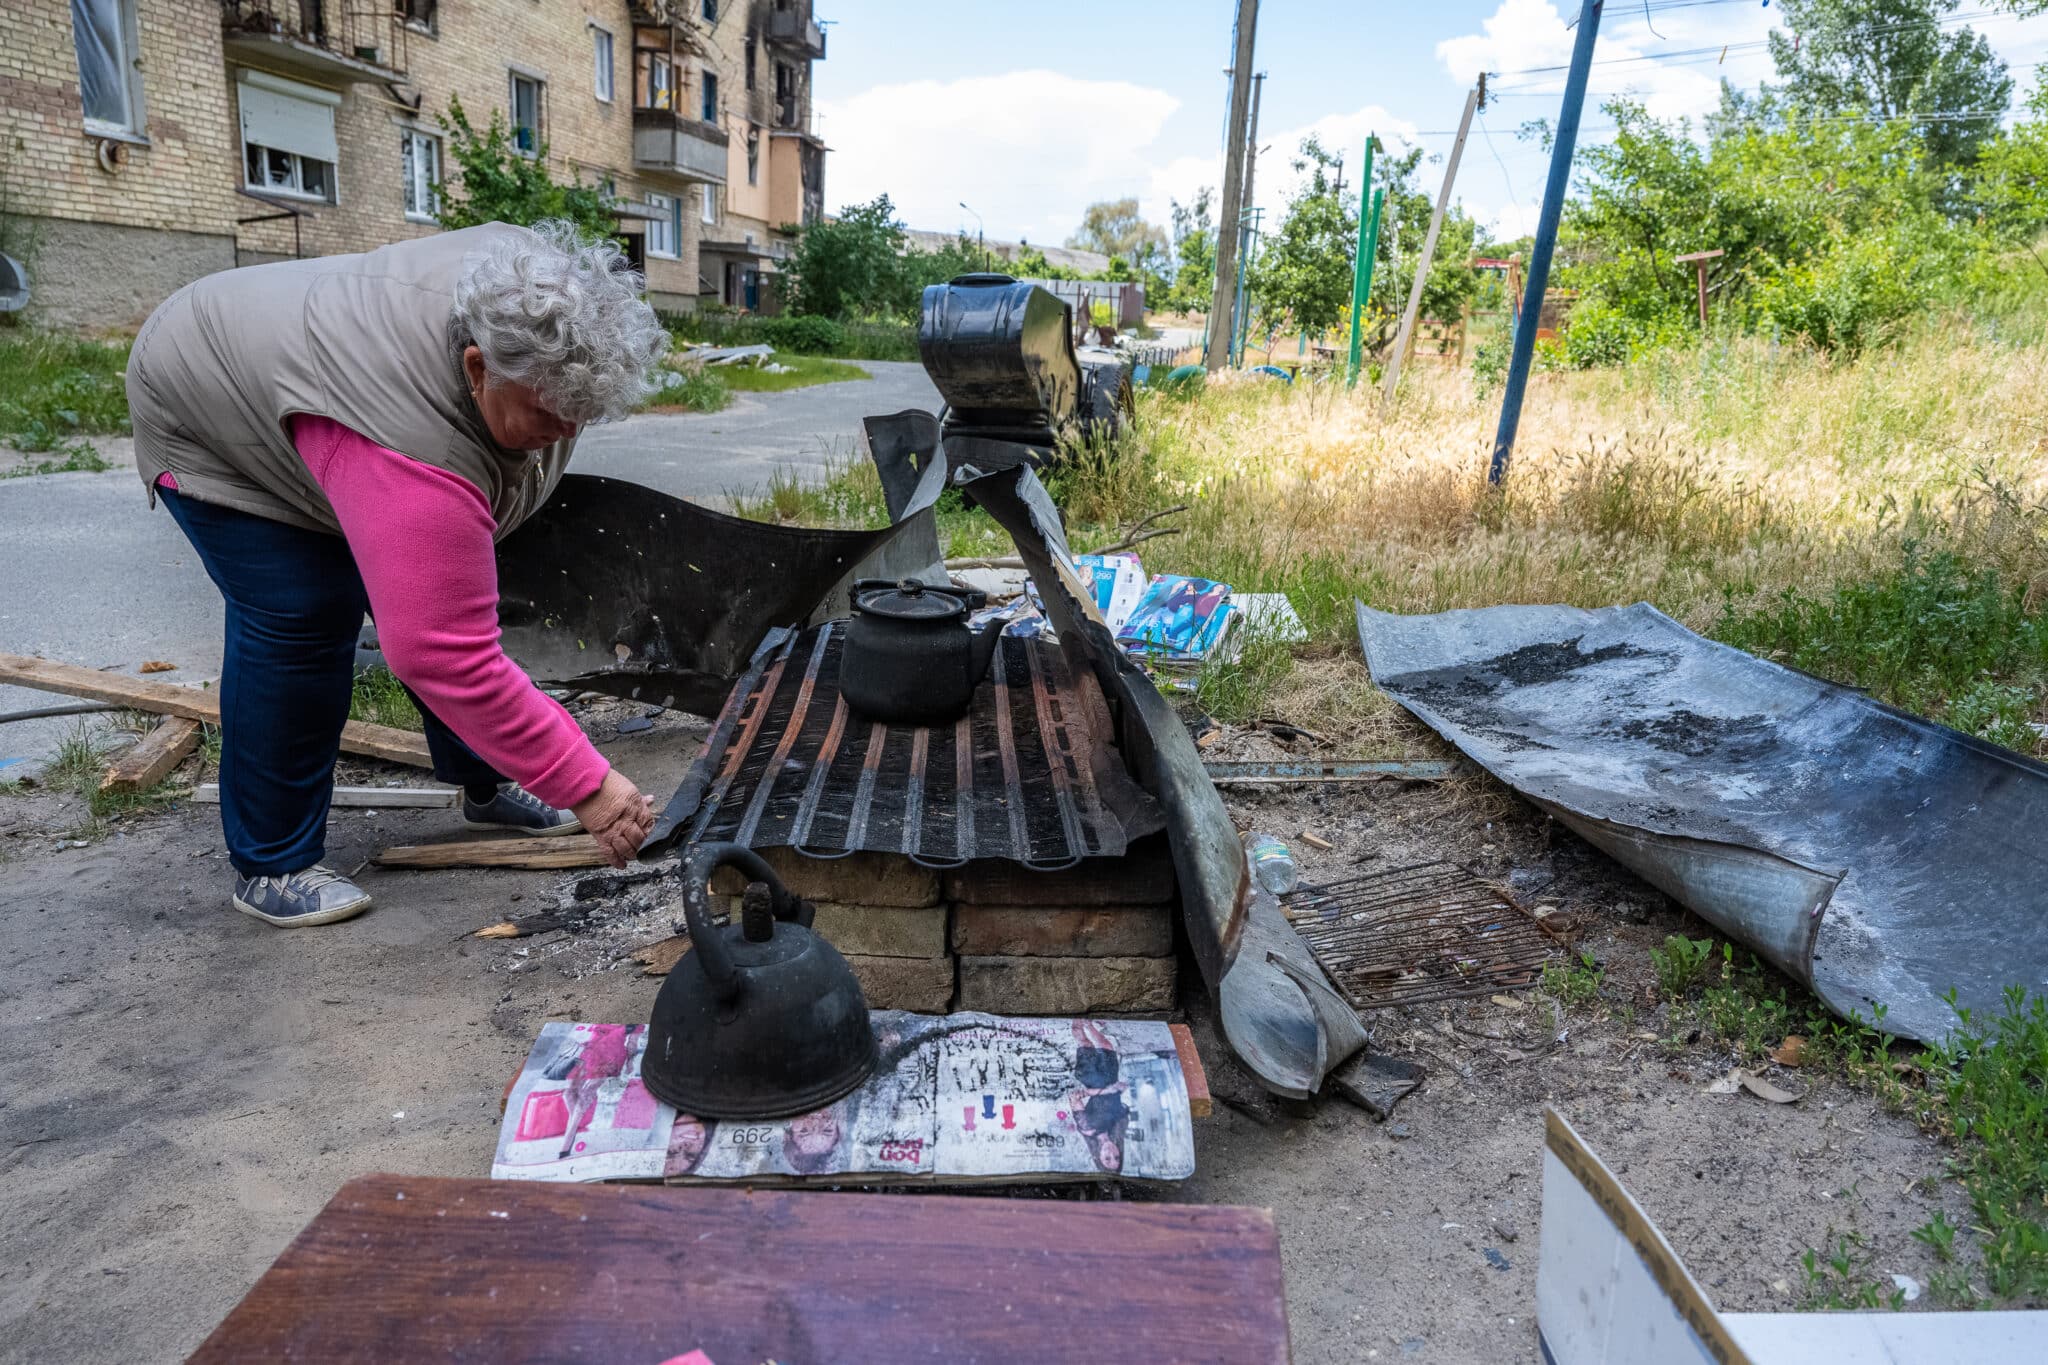 HORENKA, UKRAINE - JUNE 22: Ukrainian Olena Kalinovych moves blackened kettles on a makeshift outdoor stove used for cooking by remaining residents of an apartment block heavily damaged by a Russian rocket in early March, as they consider next steps to rebuild in the northern Kyiv suburb of Horenka, Ukraine, on June 22, 2022. Russian forces invading Ukraine on February 24 fought pitched battles with Ukrainian armed forces in the northern suburbs of the Ukrainian capital throughout March, leaving a trail of destruction that residents only today are beginning to cope with, as they attempt initial rebuilding efforts. (Photo by Scott Peterson/Getty Images)